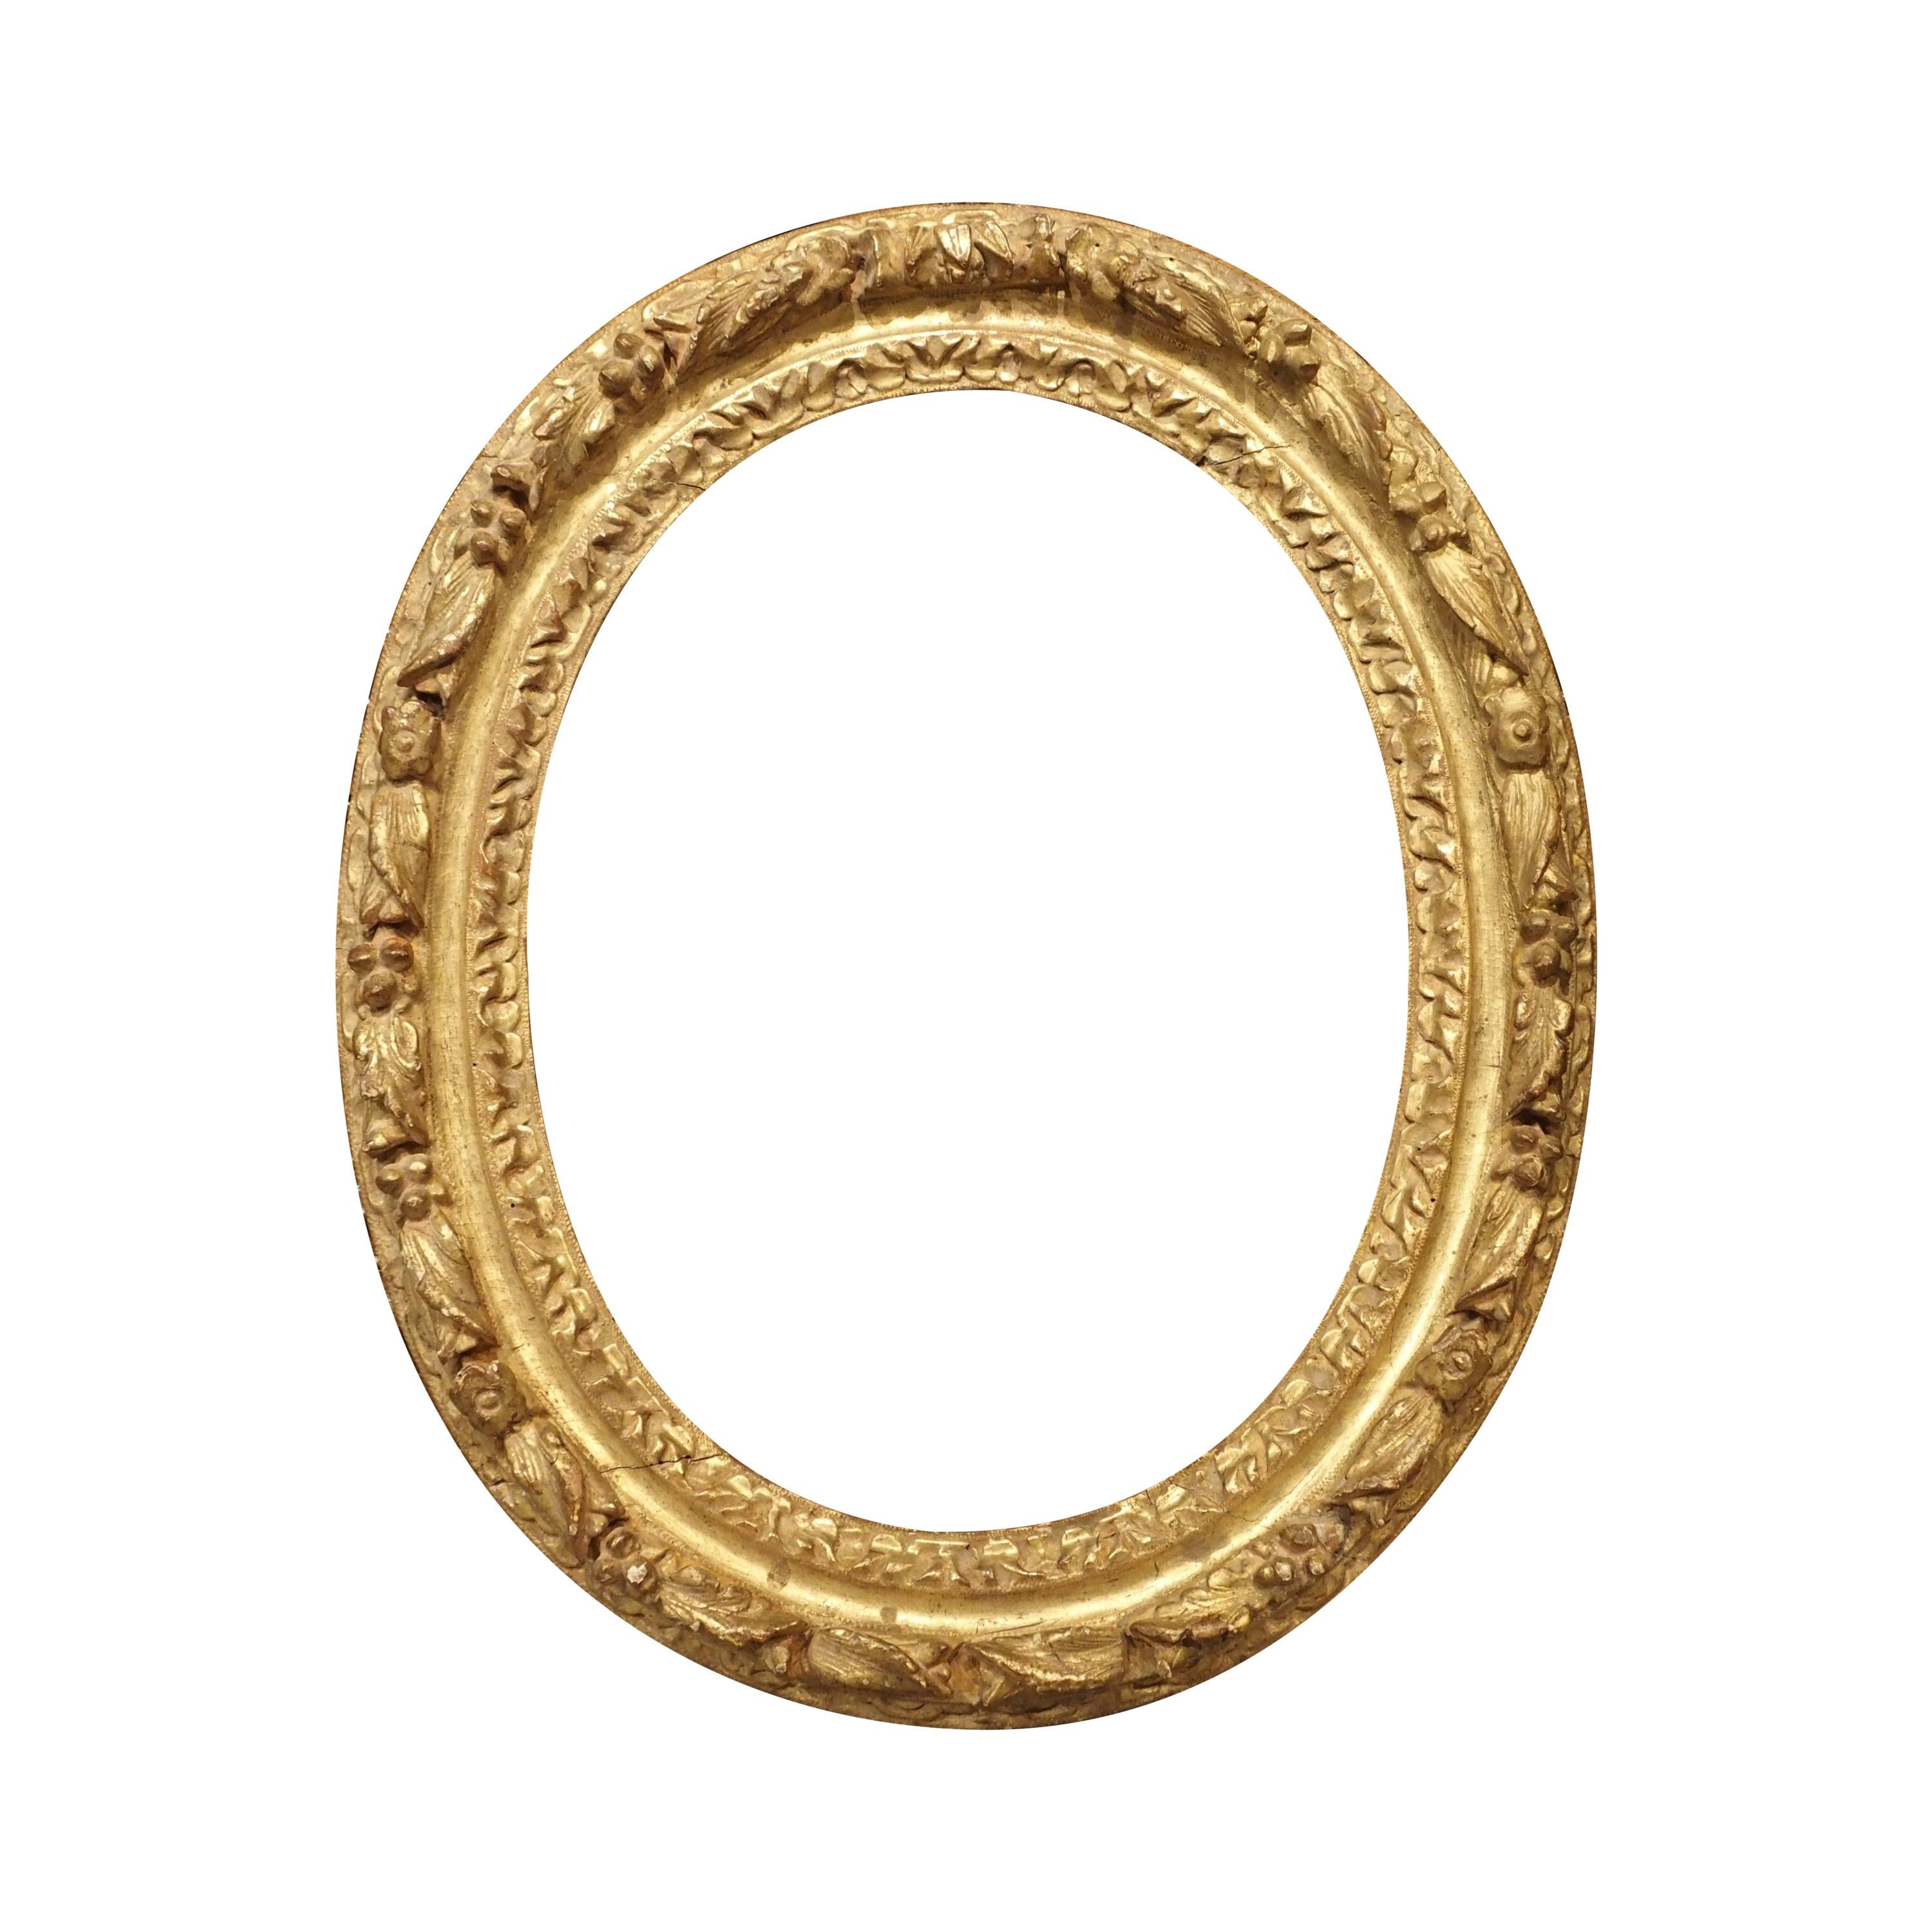 Small Antique Oval Giltwood Frame from Paris, 17th Century